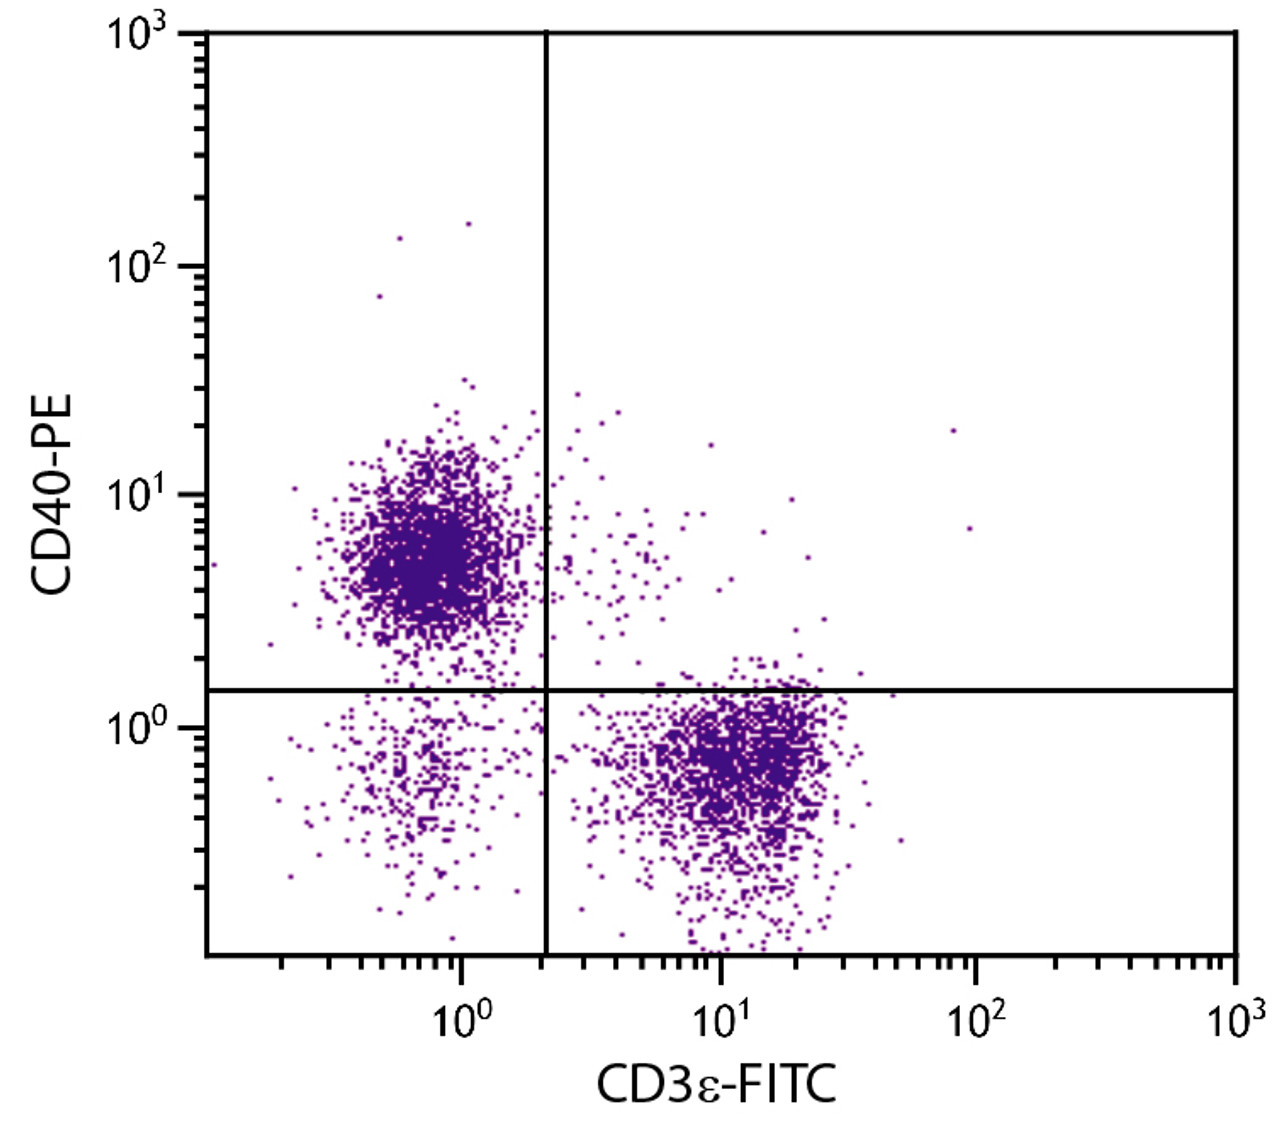 BALB/c mouse splenocytes were stained with Rat Anti-Mouse CD40-PE (Cat. No. 98-765) and Rat Anti-Mouse CD3?-FITC .